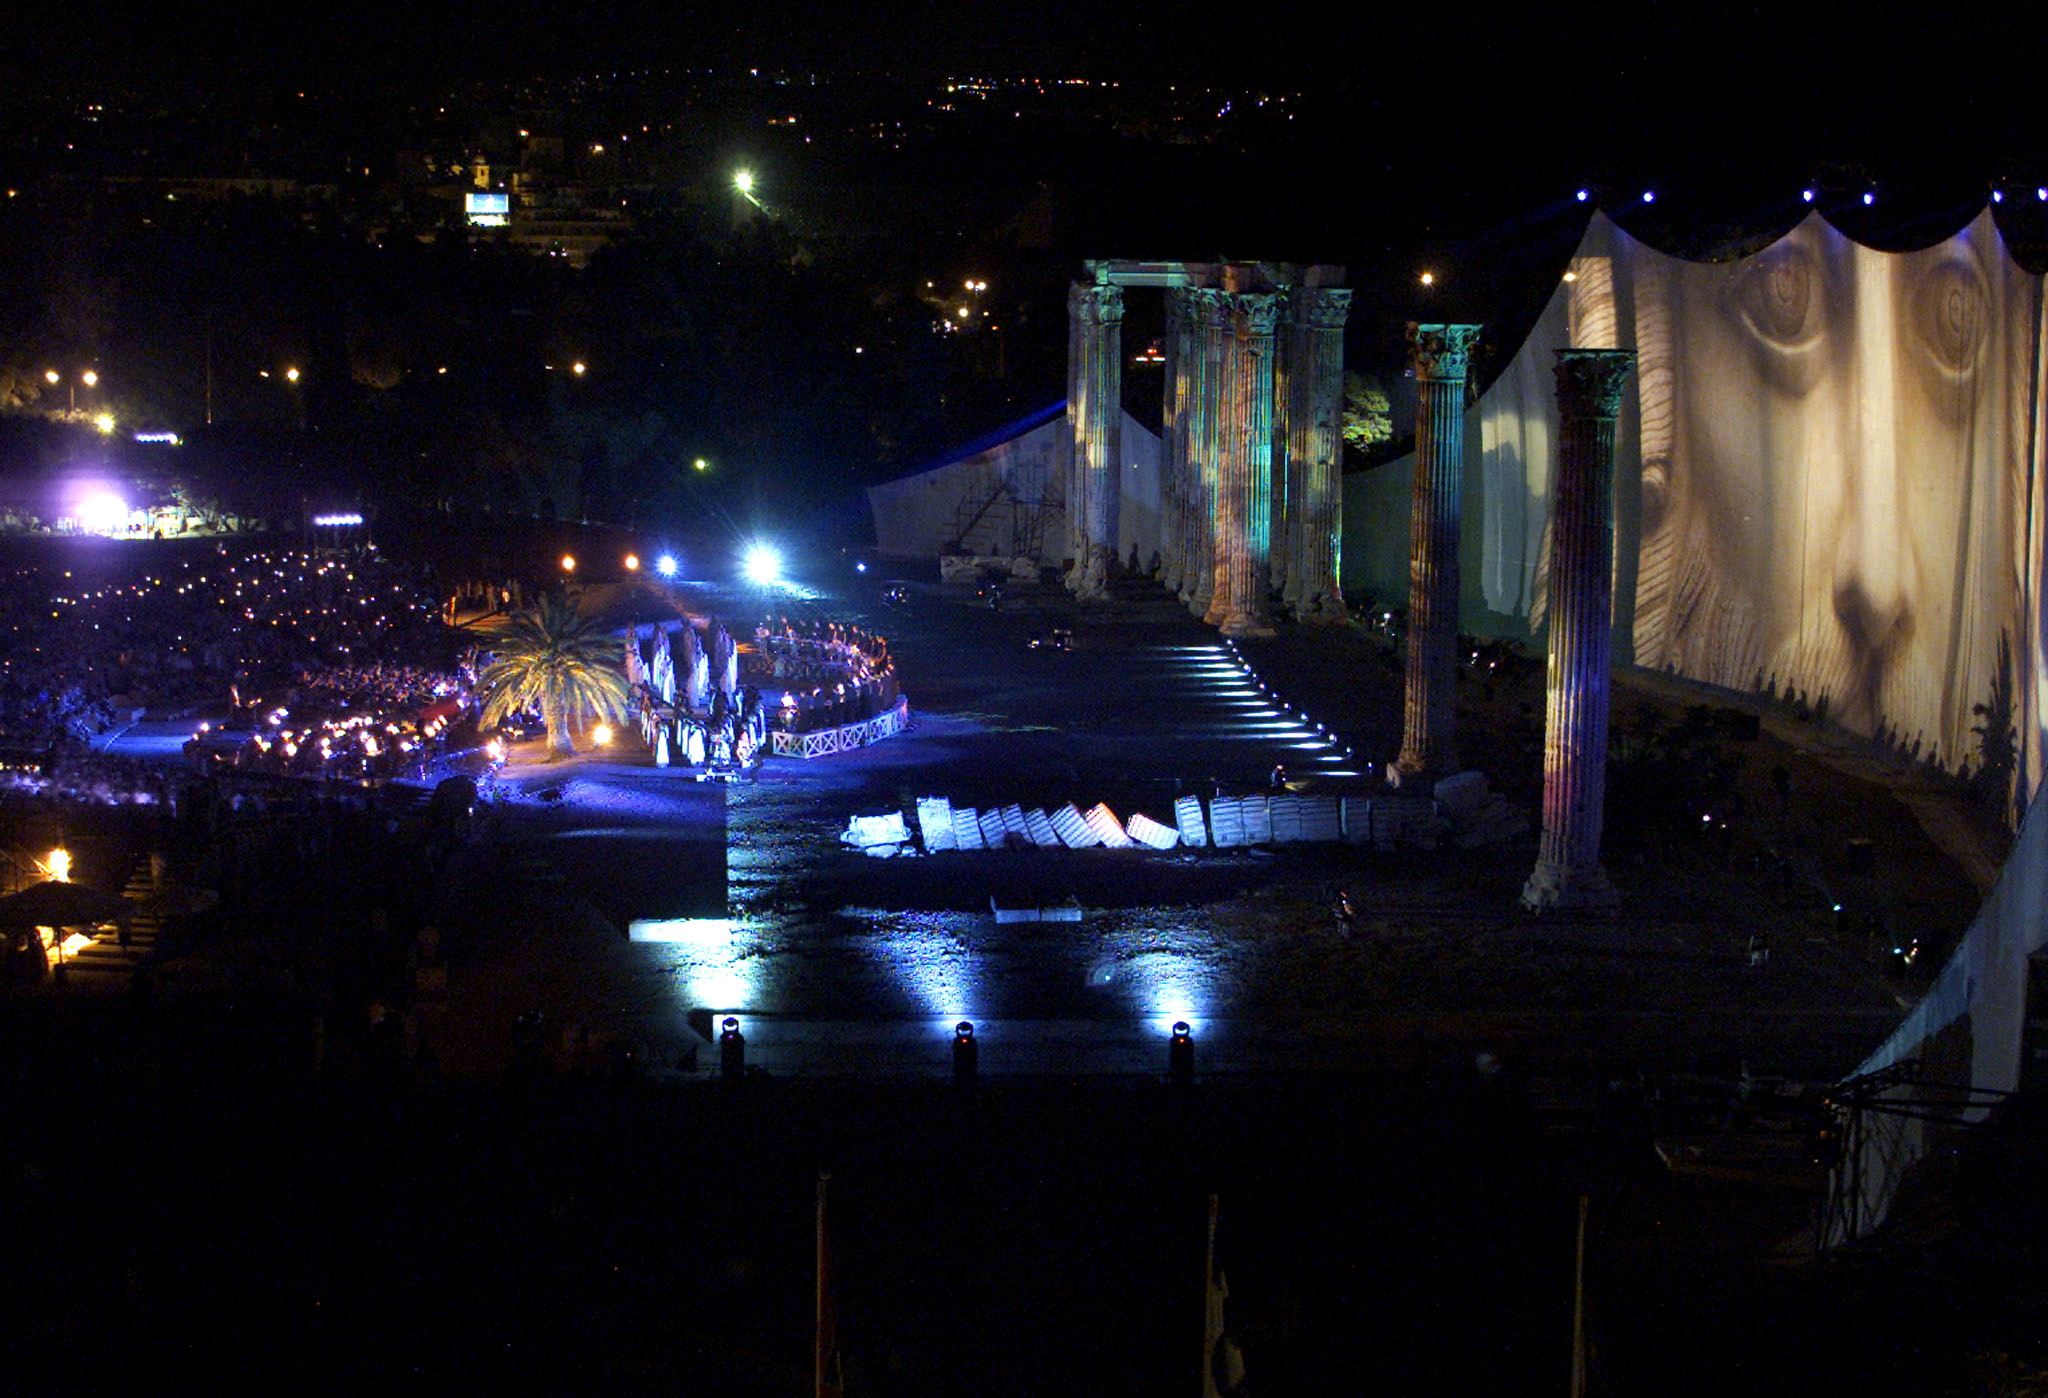 GREEK COMPOSER VANGELIS PERFORMS AT THE TEMPLE OF ZEUS IN ATHENS.